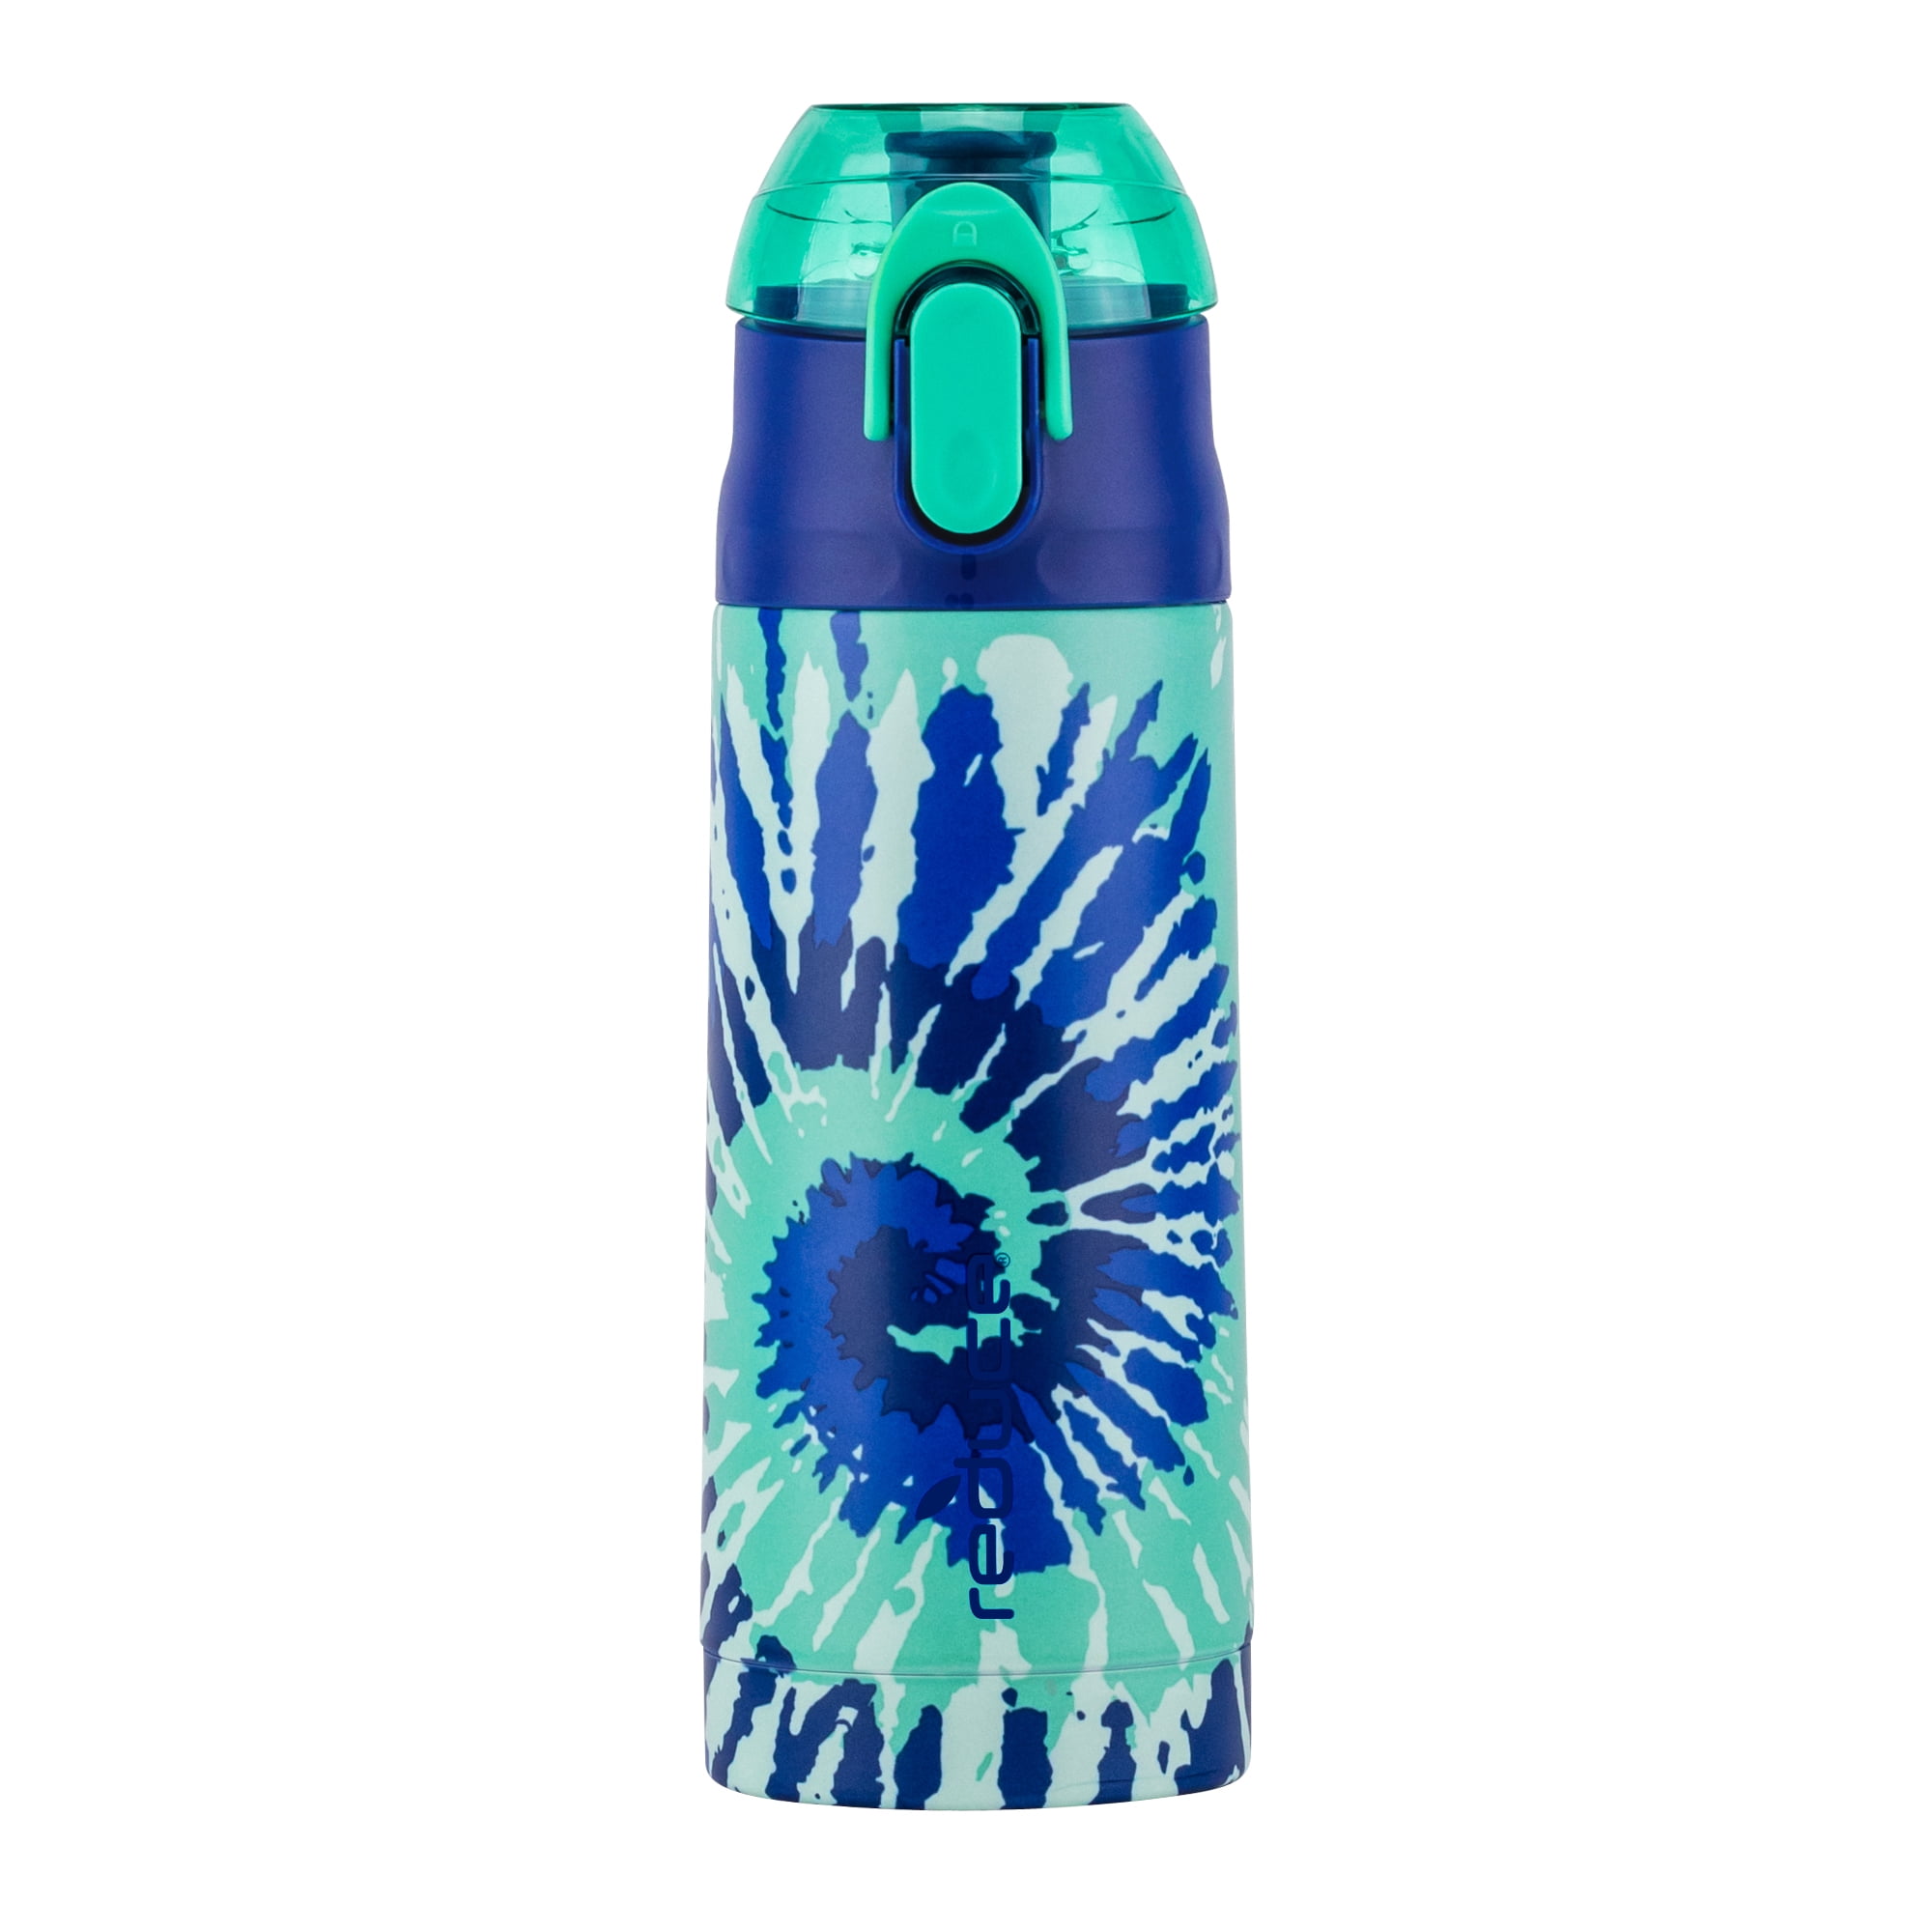 Sprinkles Personalized 13oz Reduce Frostee Water Bottle - Aqua